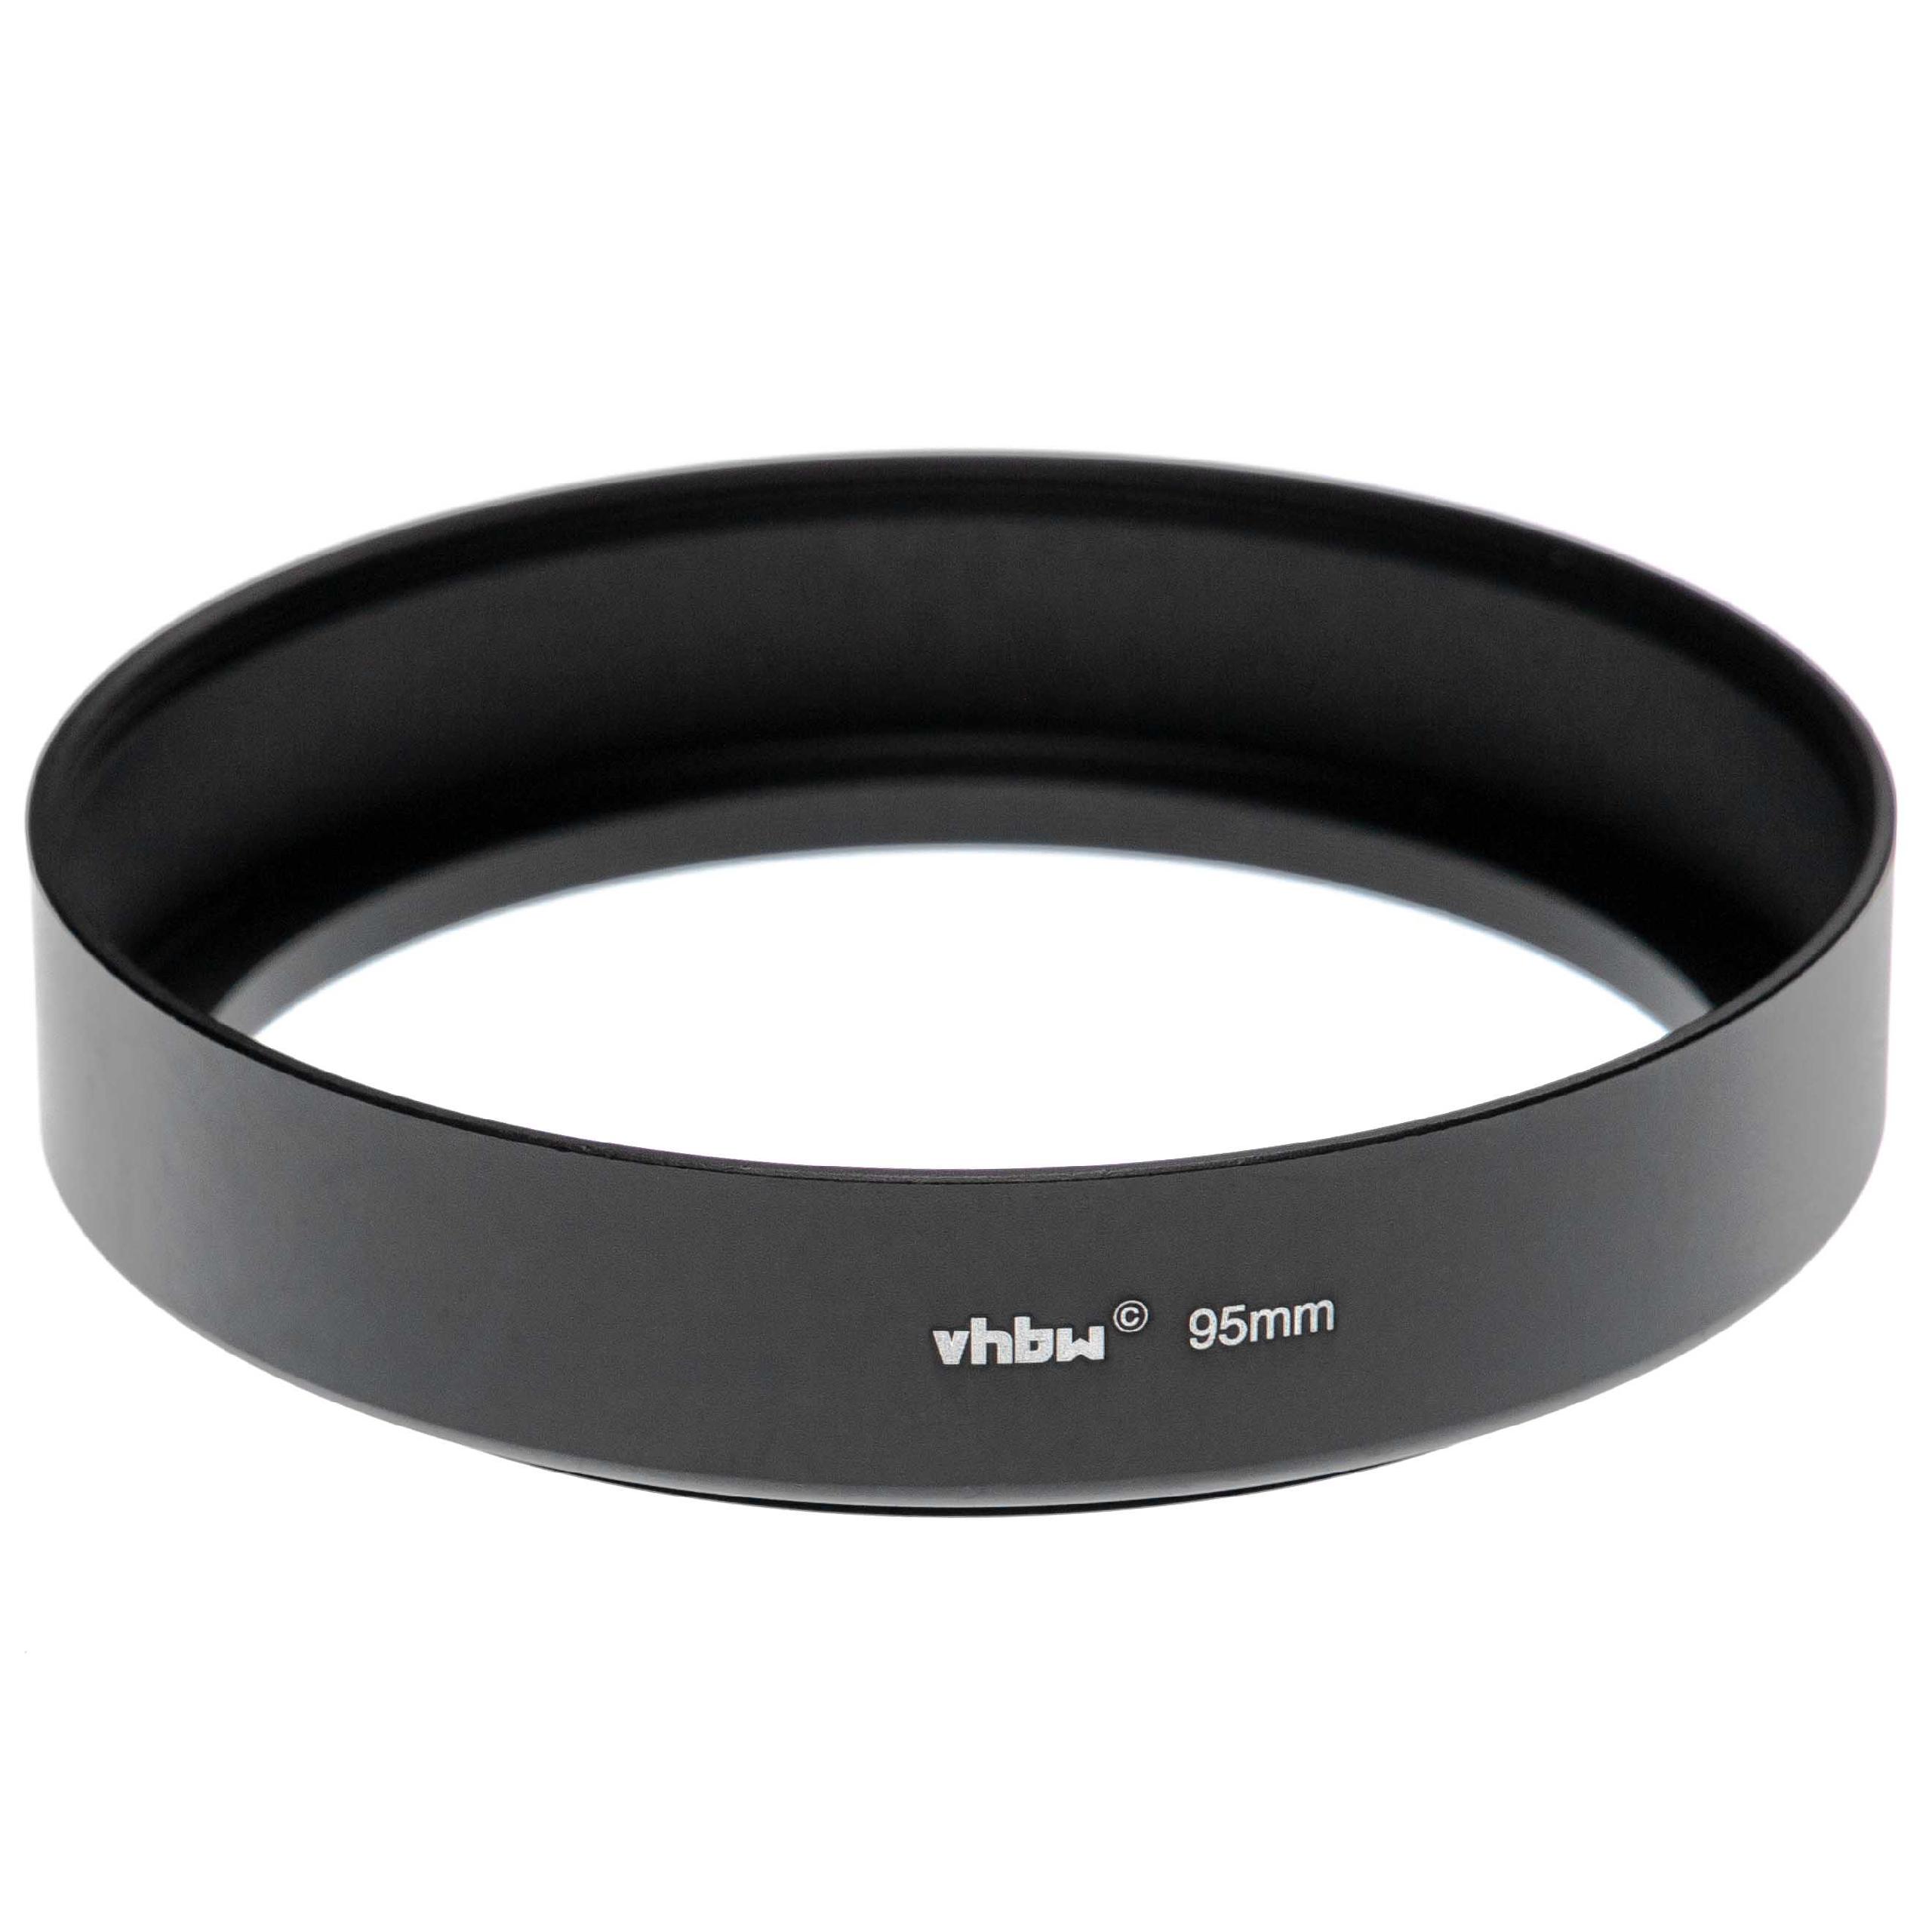 Lens Hood suitable for 95mm Lens - Lens Shade, with Filter Thread (104 mm) Black, Round